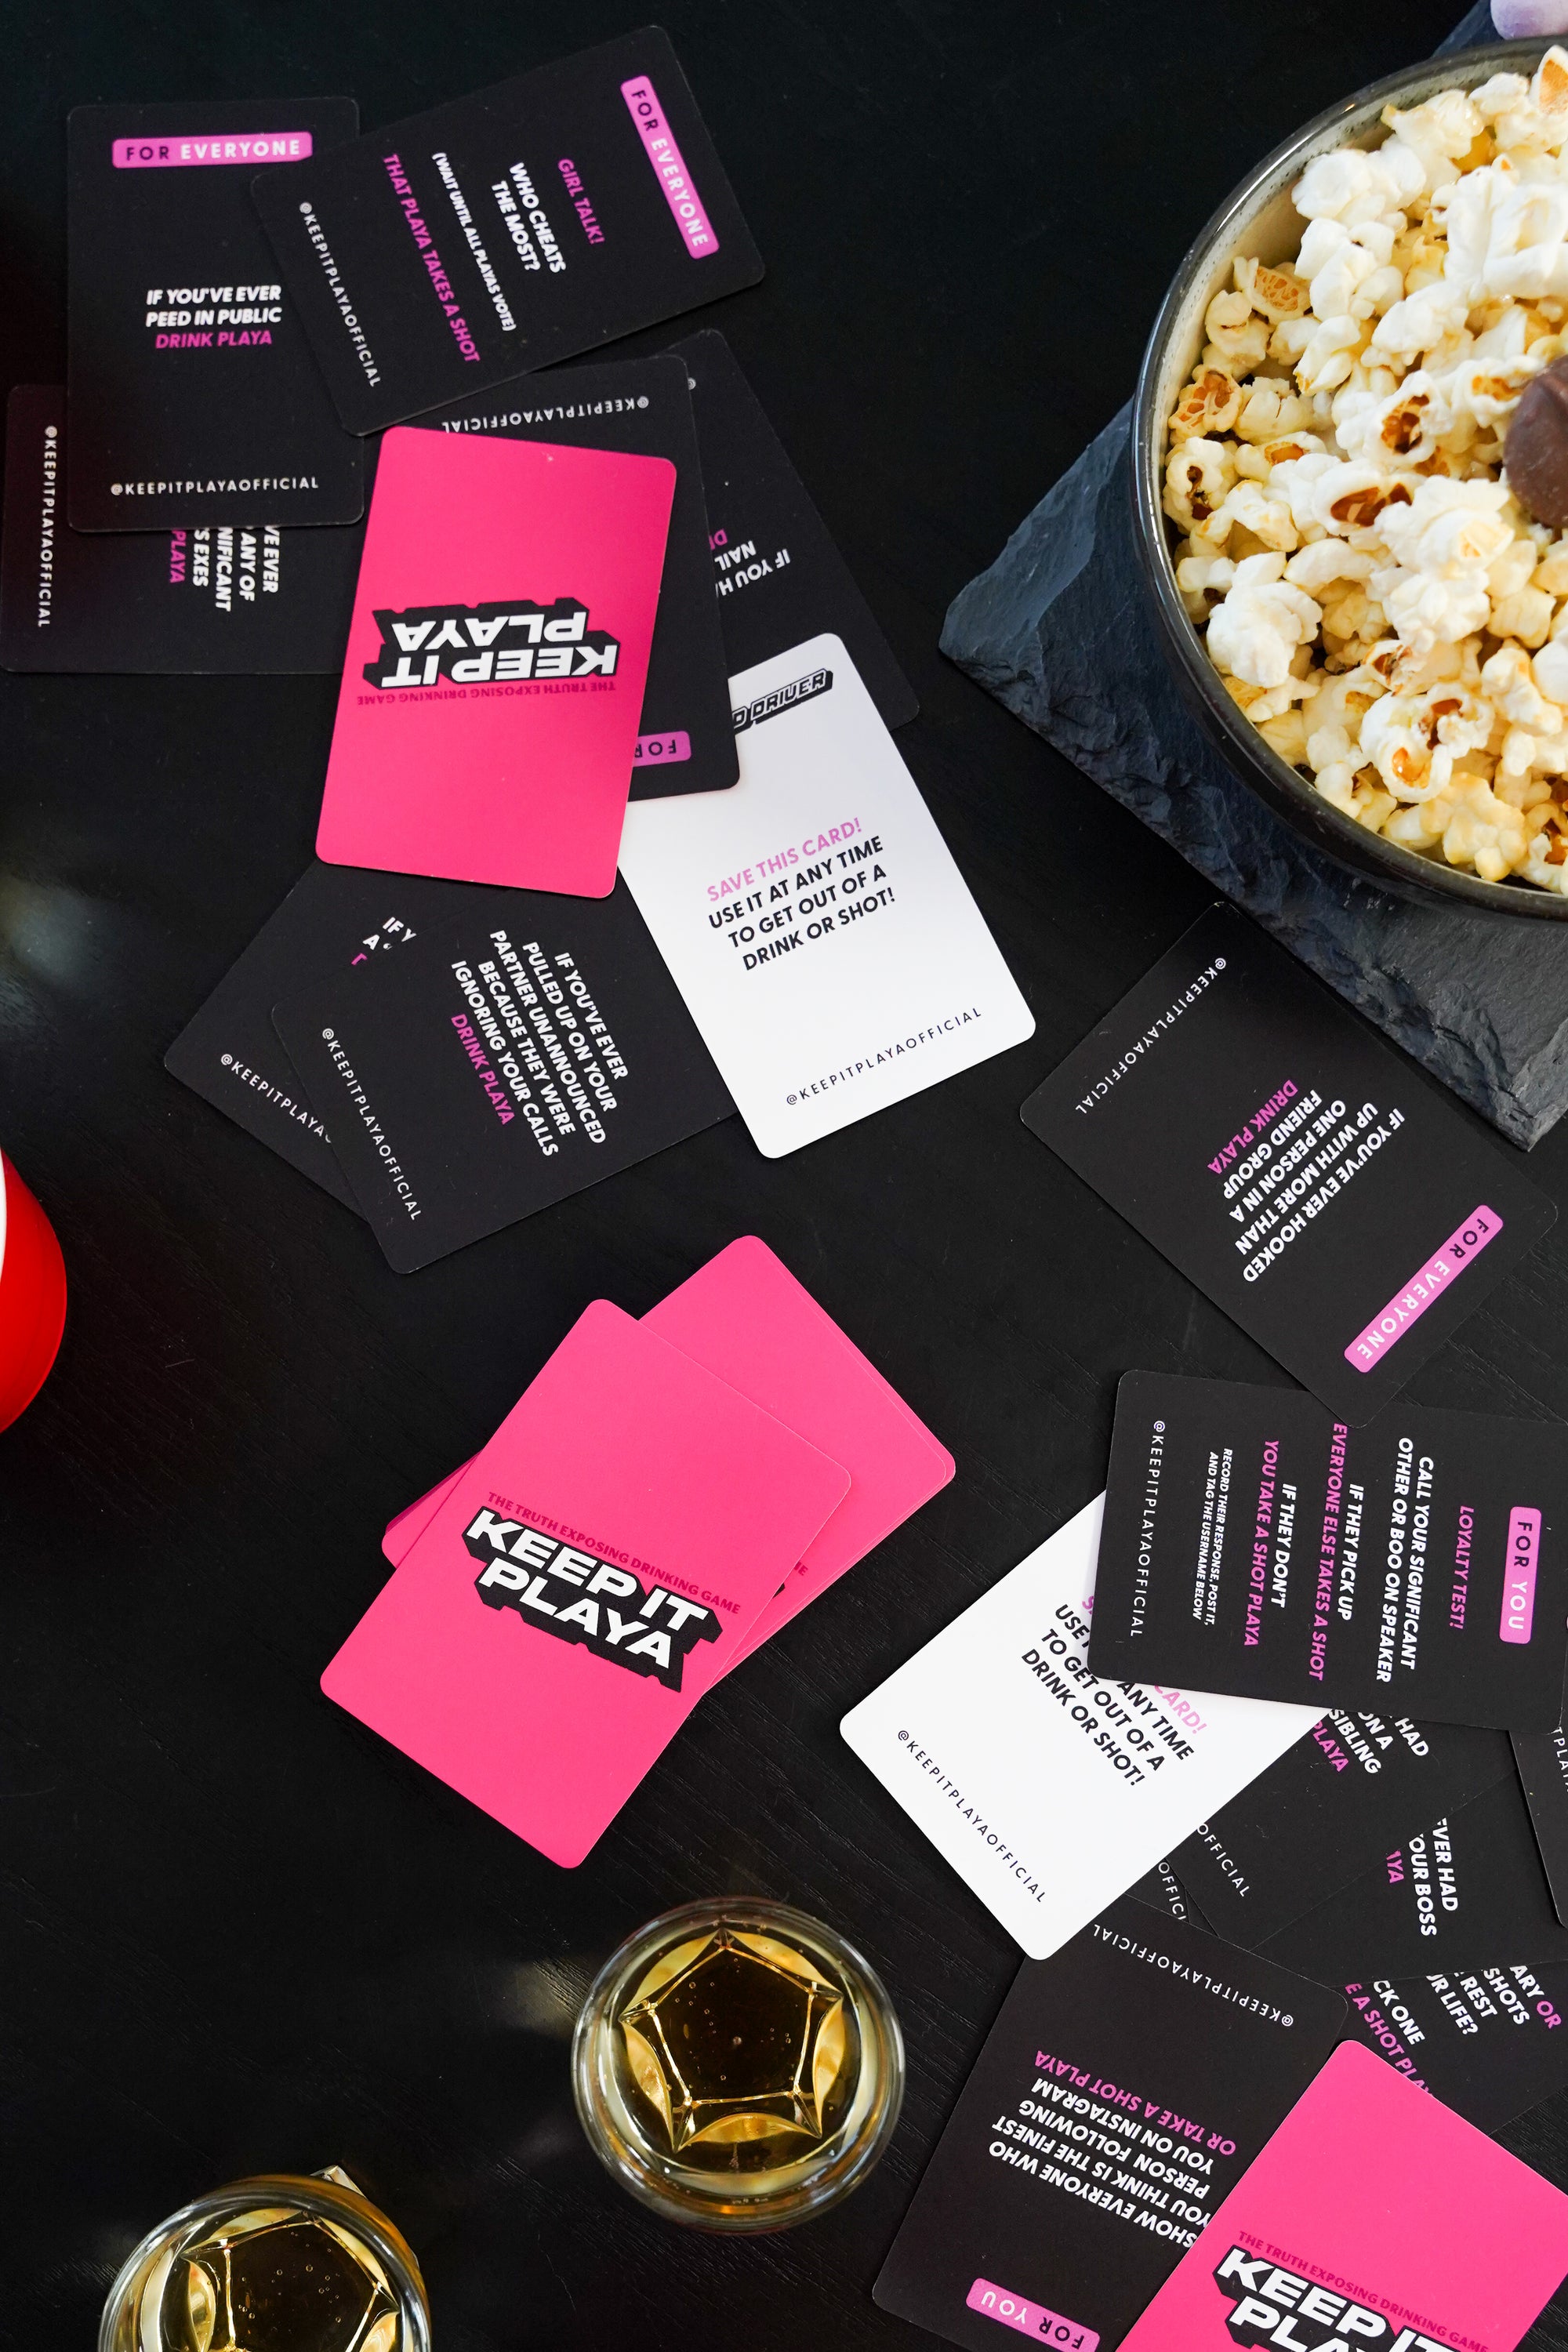 Sip, Shop, Slay: Keep It Playa Drinking Card Game Takes Girls' Night Post-Shopping Spree to a Whole New Level of Fabulousness!